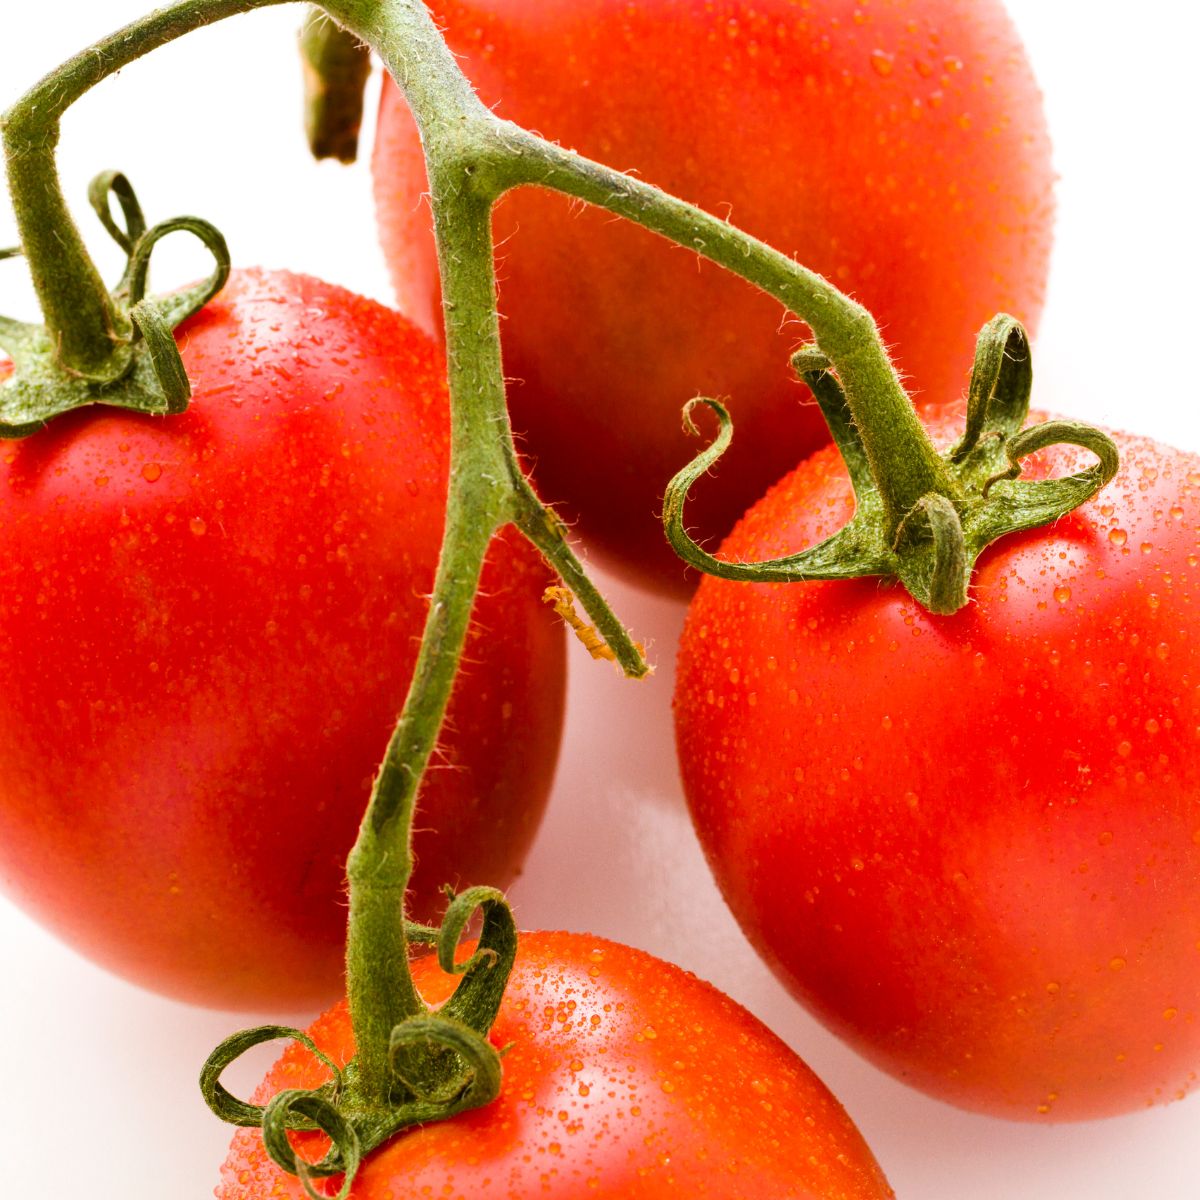 This is Roma tomatoes.